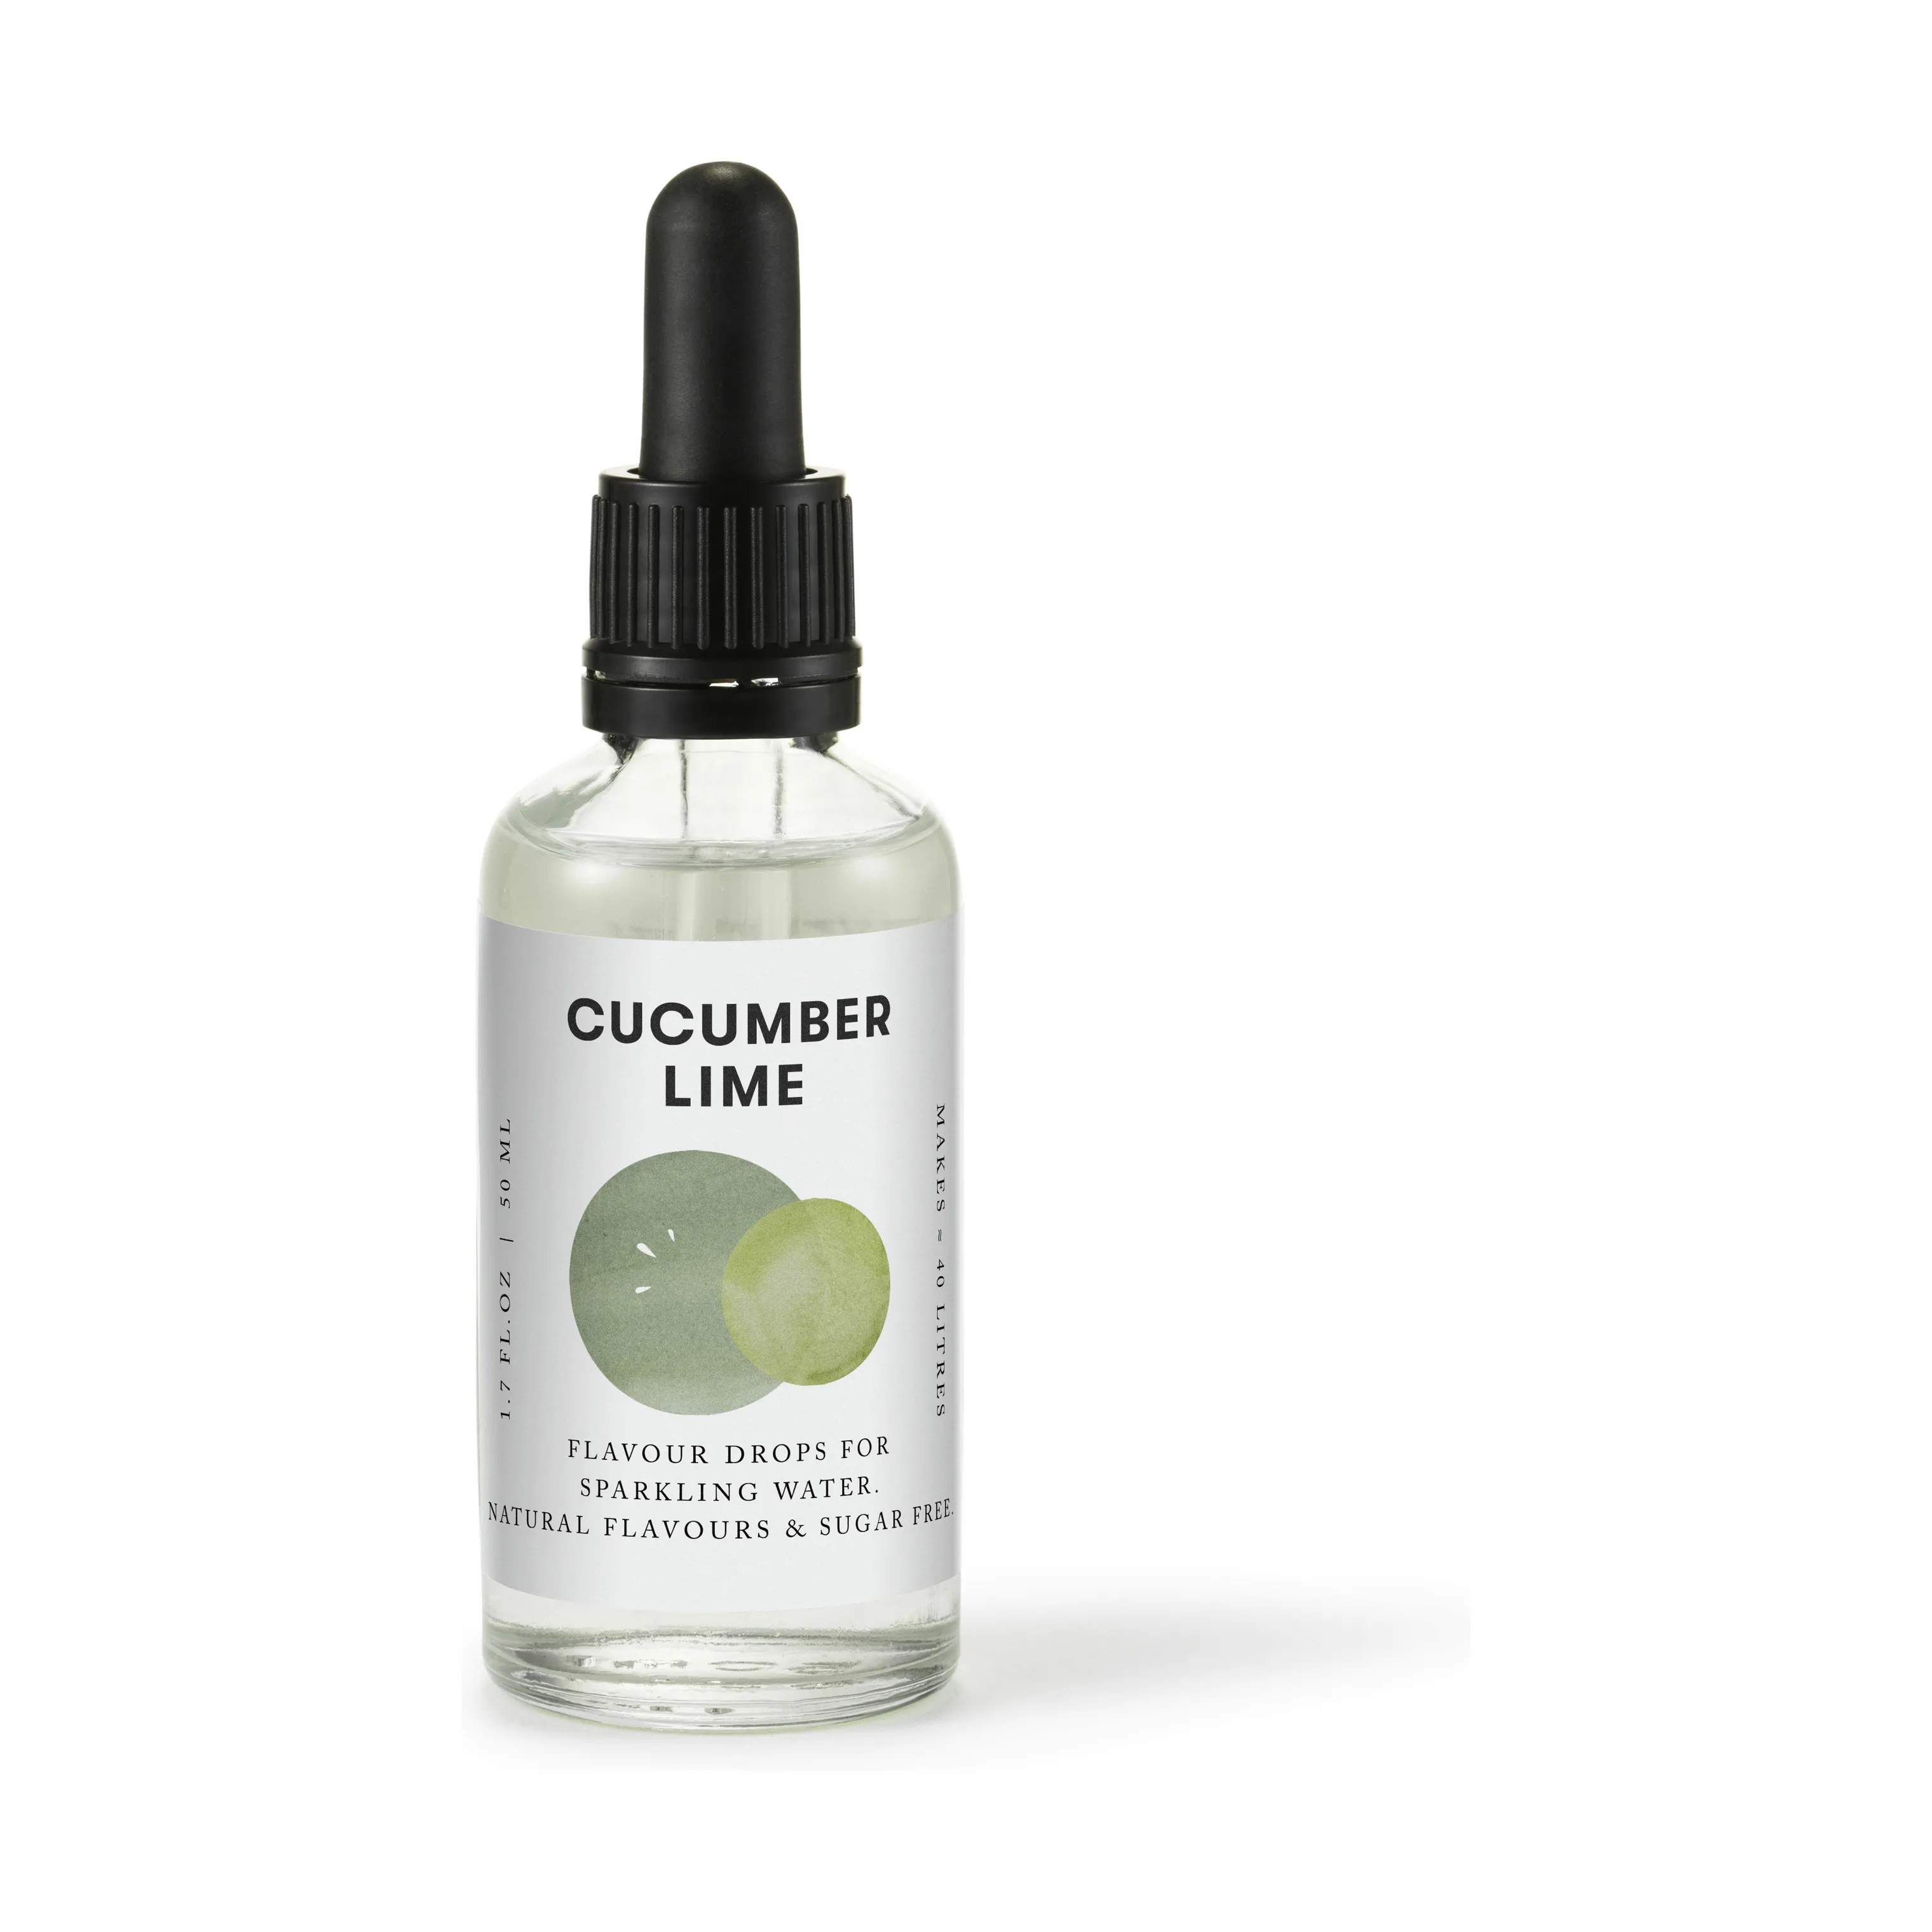 Aarke smagskoncentrater Flavour Drops - Cucumber Lime